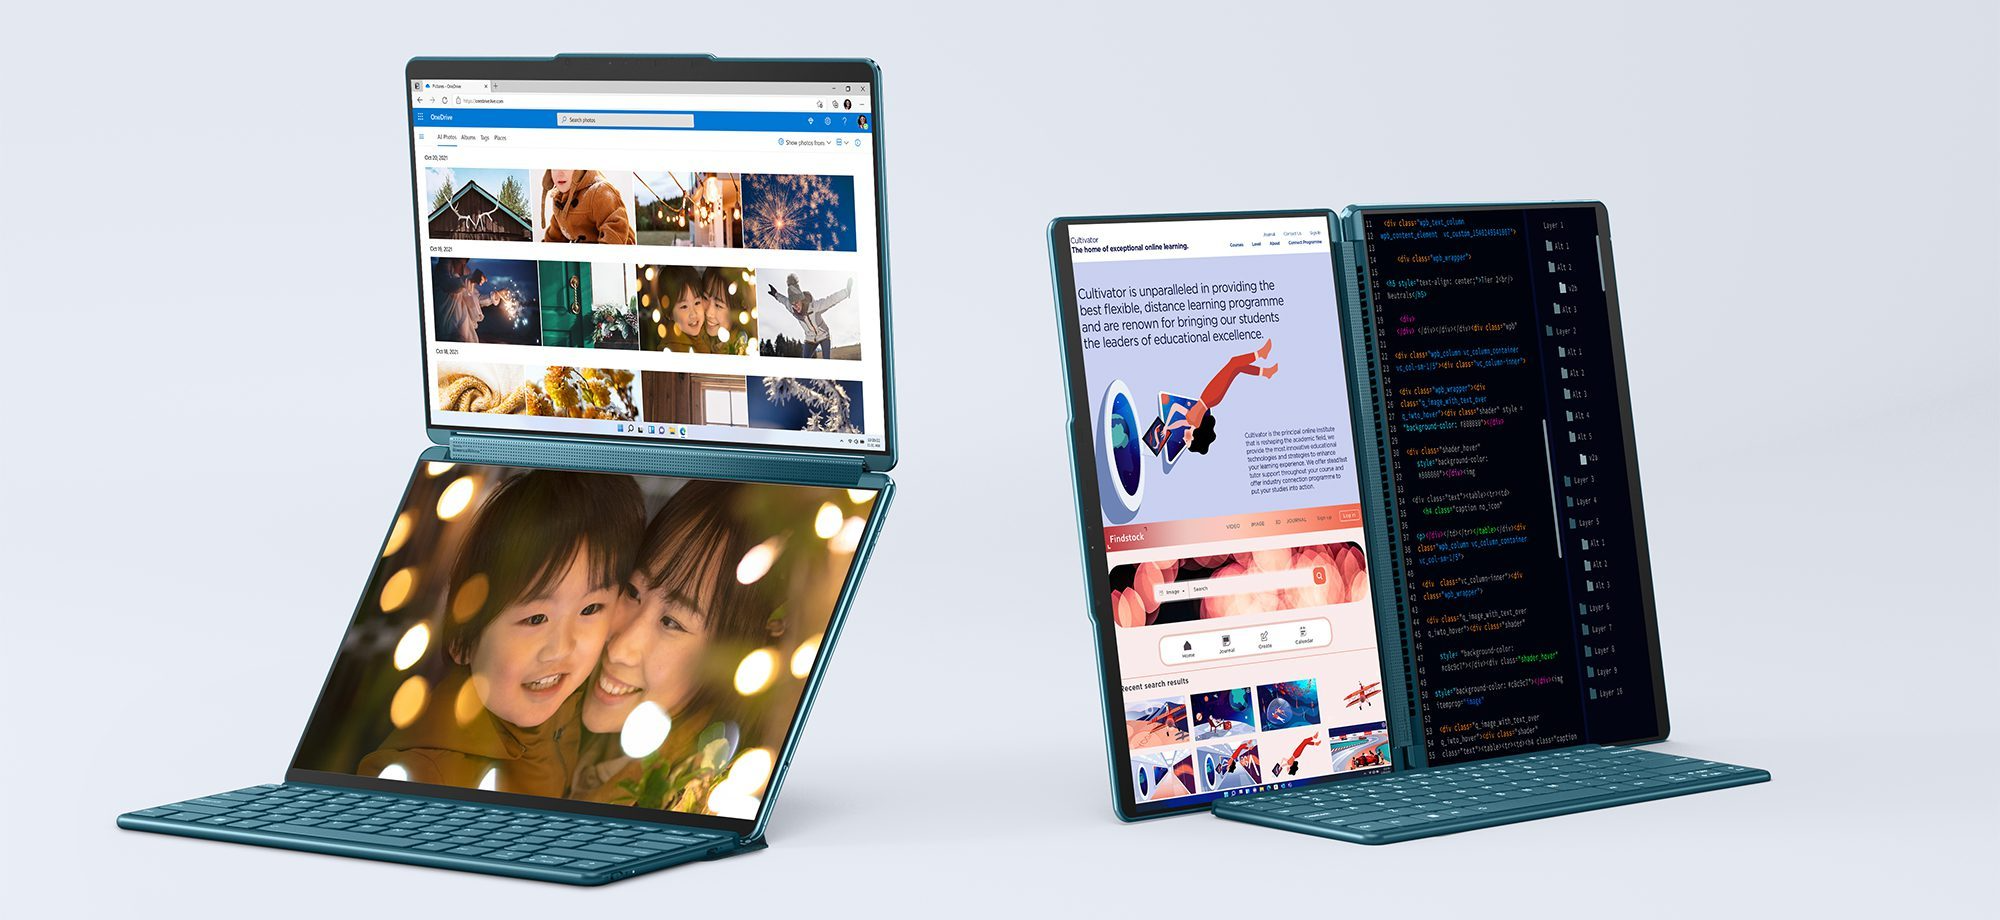 CES 2023 Lenovo Yoga Book 9i Dual Display Laptop Launched; Checkout